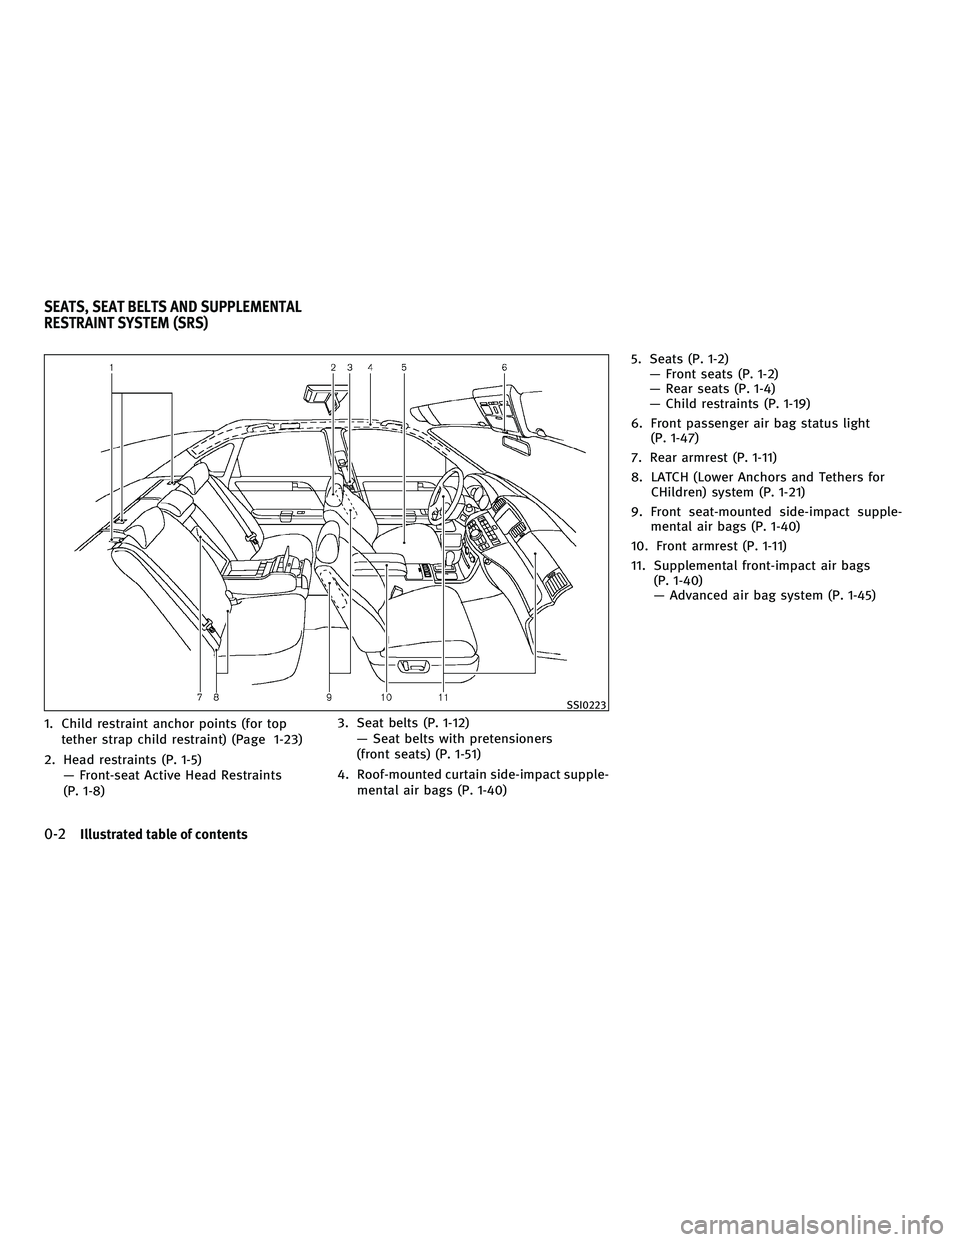 INFINITI M 2010  Owners Manual 1. Child restraint anchor points (for toptether strap child restraint) (Page 1-23)
2. Head restraints (P. 1-5) Ð Front-seat Active Head Restraints
(P. 1-8) 3. Seat belts (P. 1-12)
Ð Seat belts with 